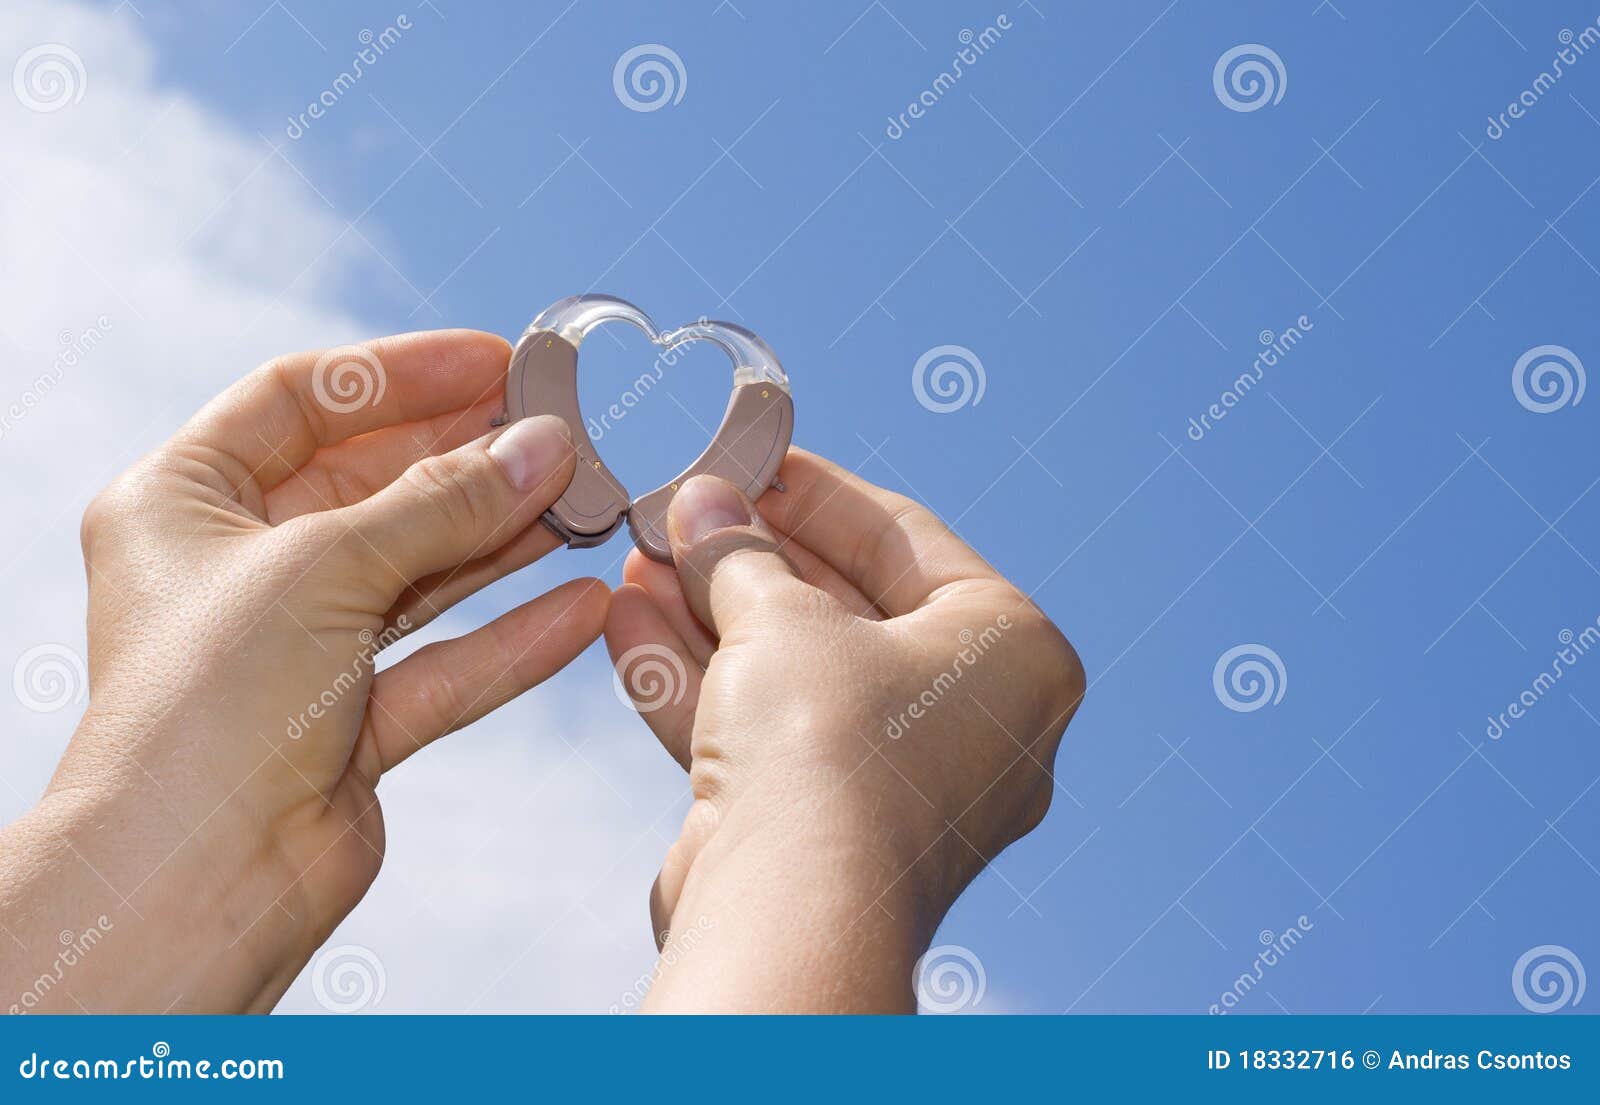 showing a heart from hearing aids